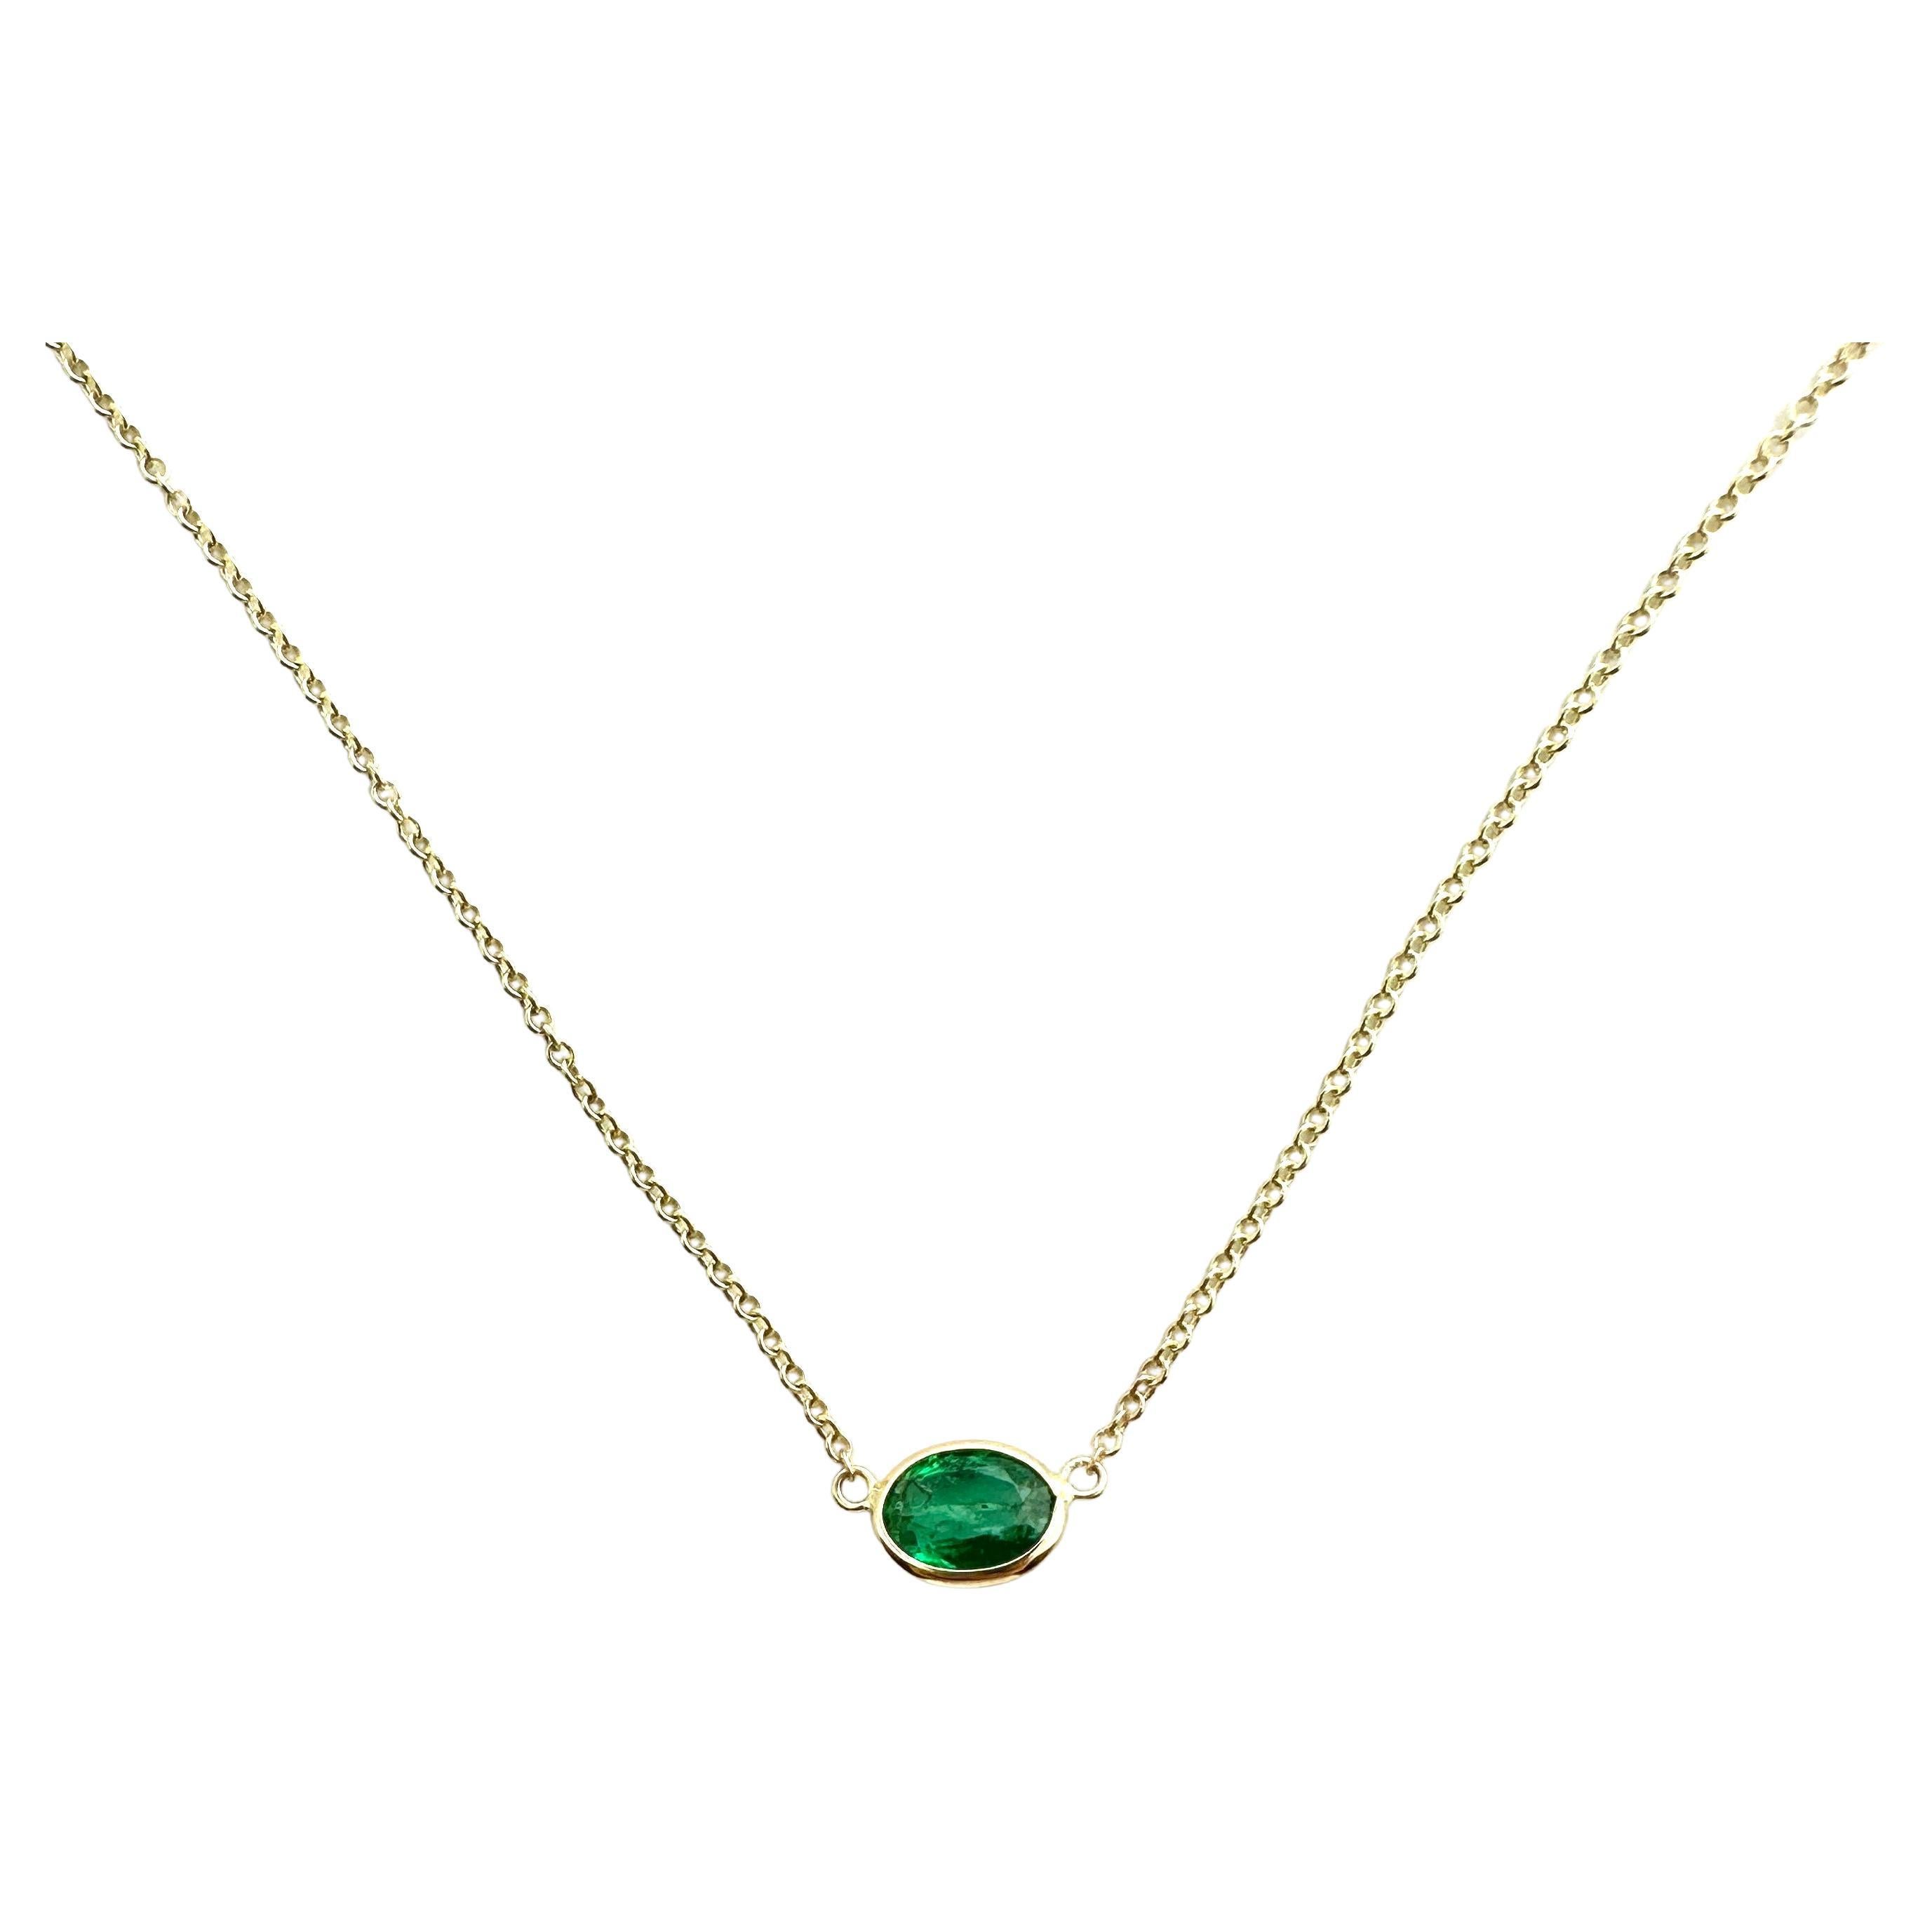 0.97 Carat Emerald Green Oval & Fashion Necklaces In 14K Yellow Gold For Sale